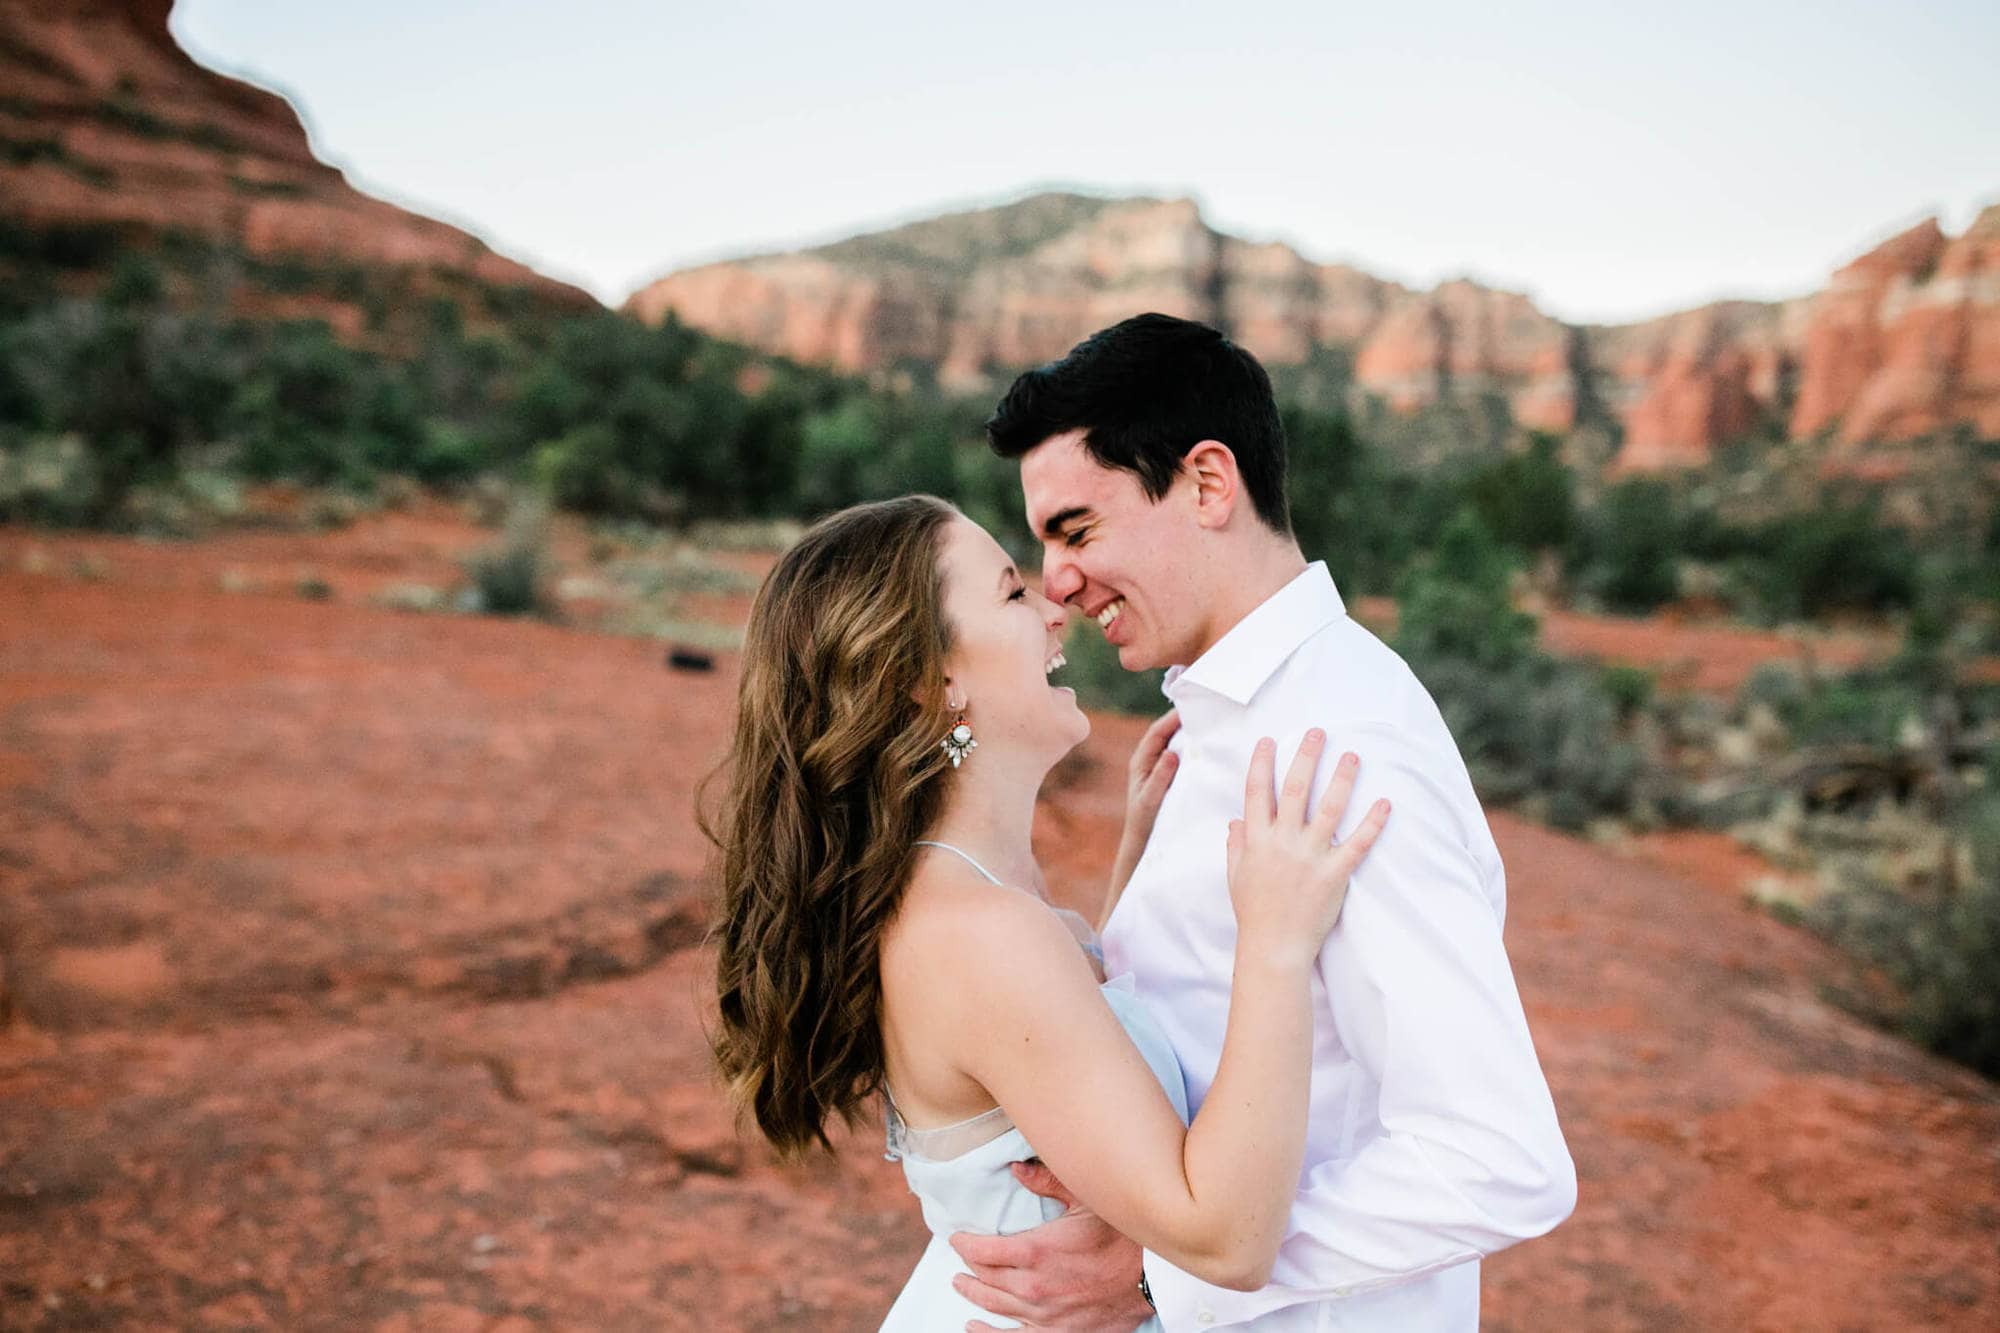 Having just eloped, the bride and groom laugh during their Sedona Adventure Wedding.